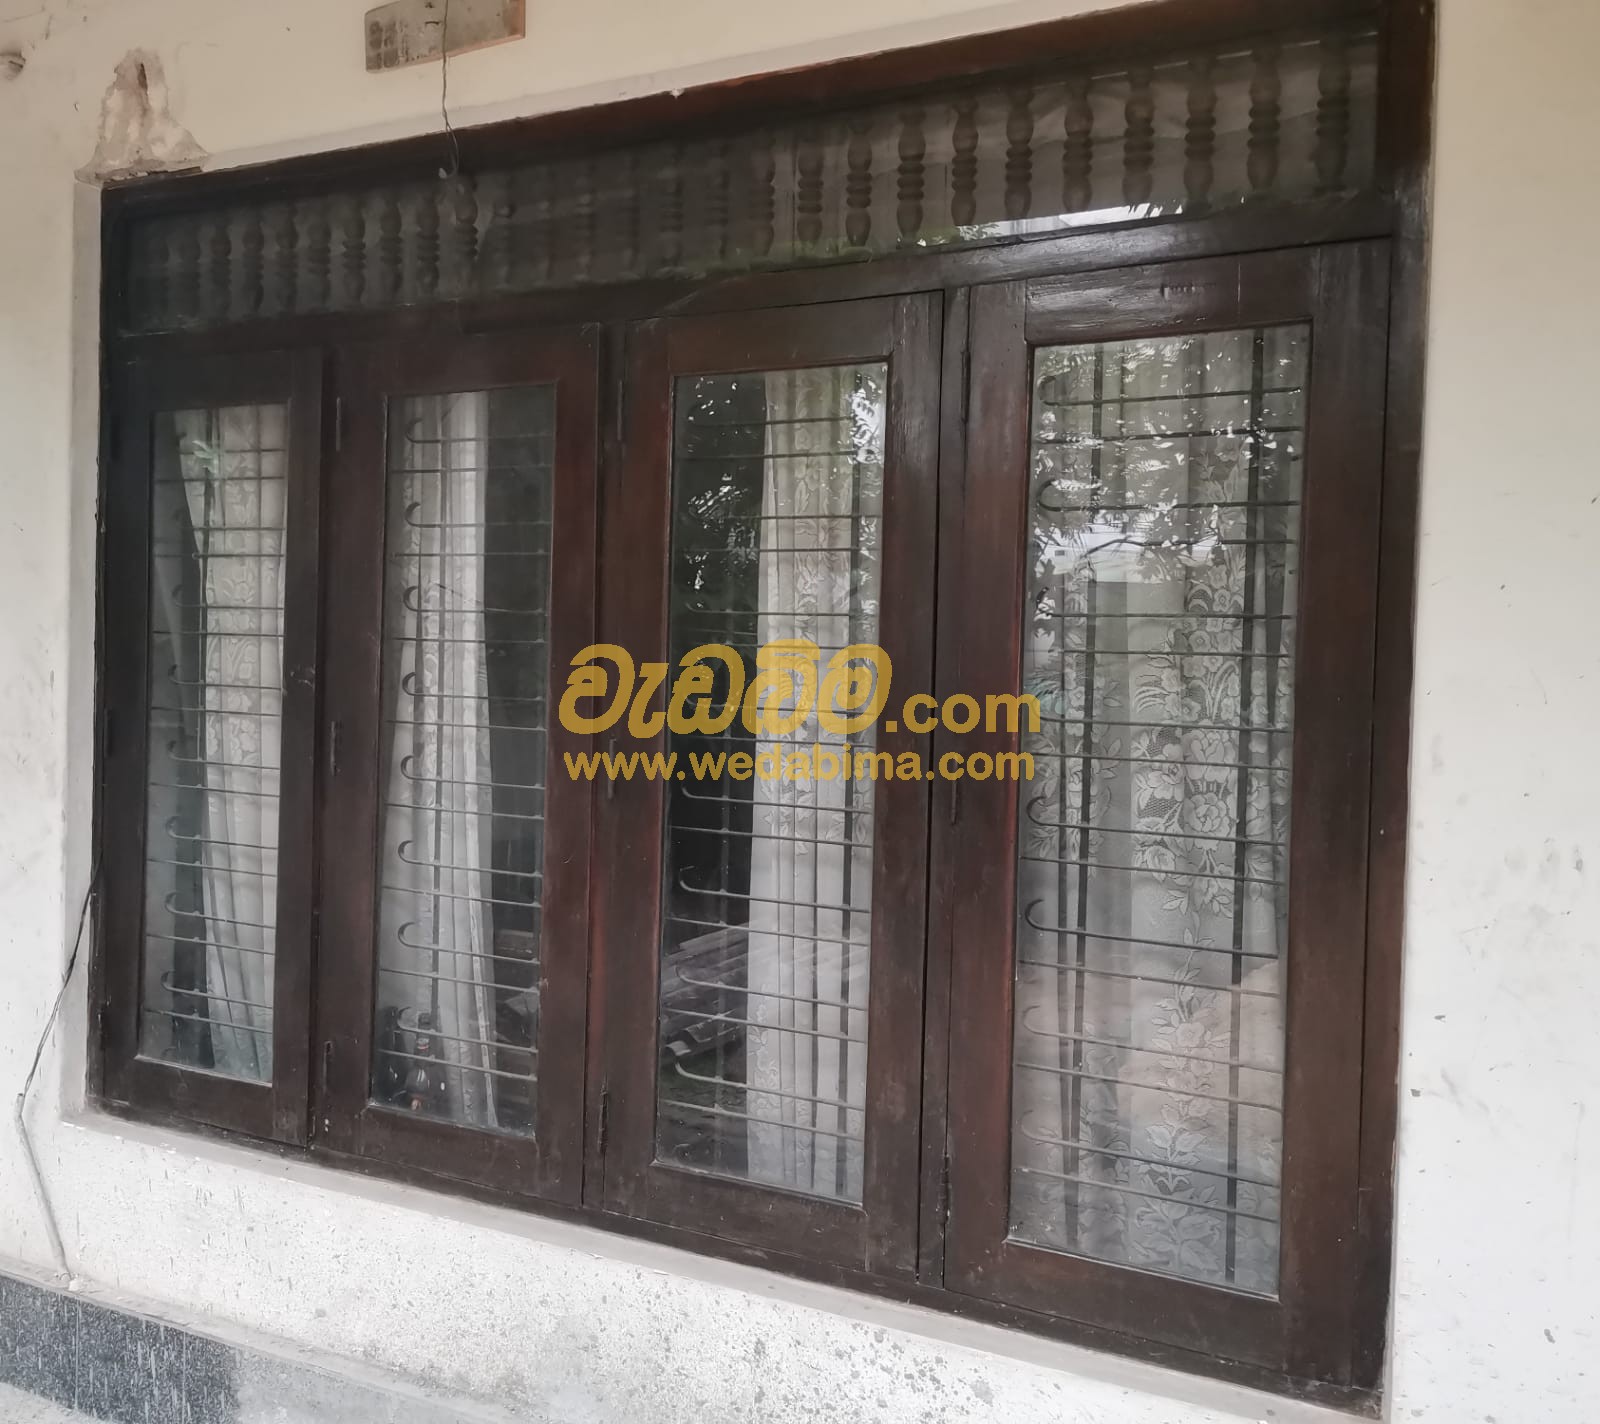 Milla Wood Windows and Window Frames for Sale